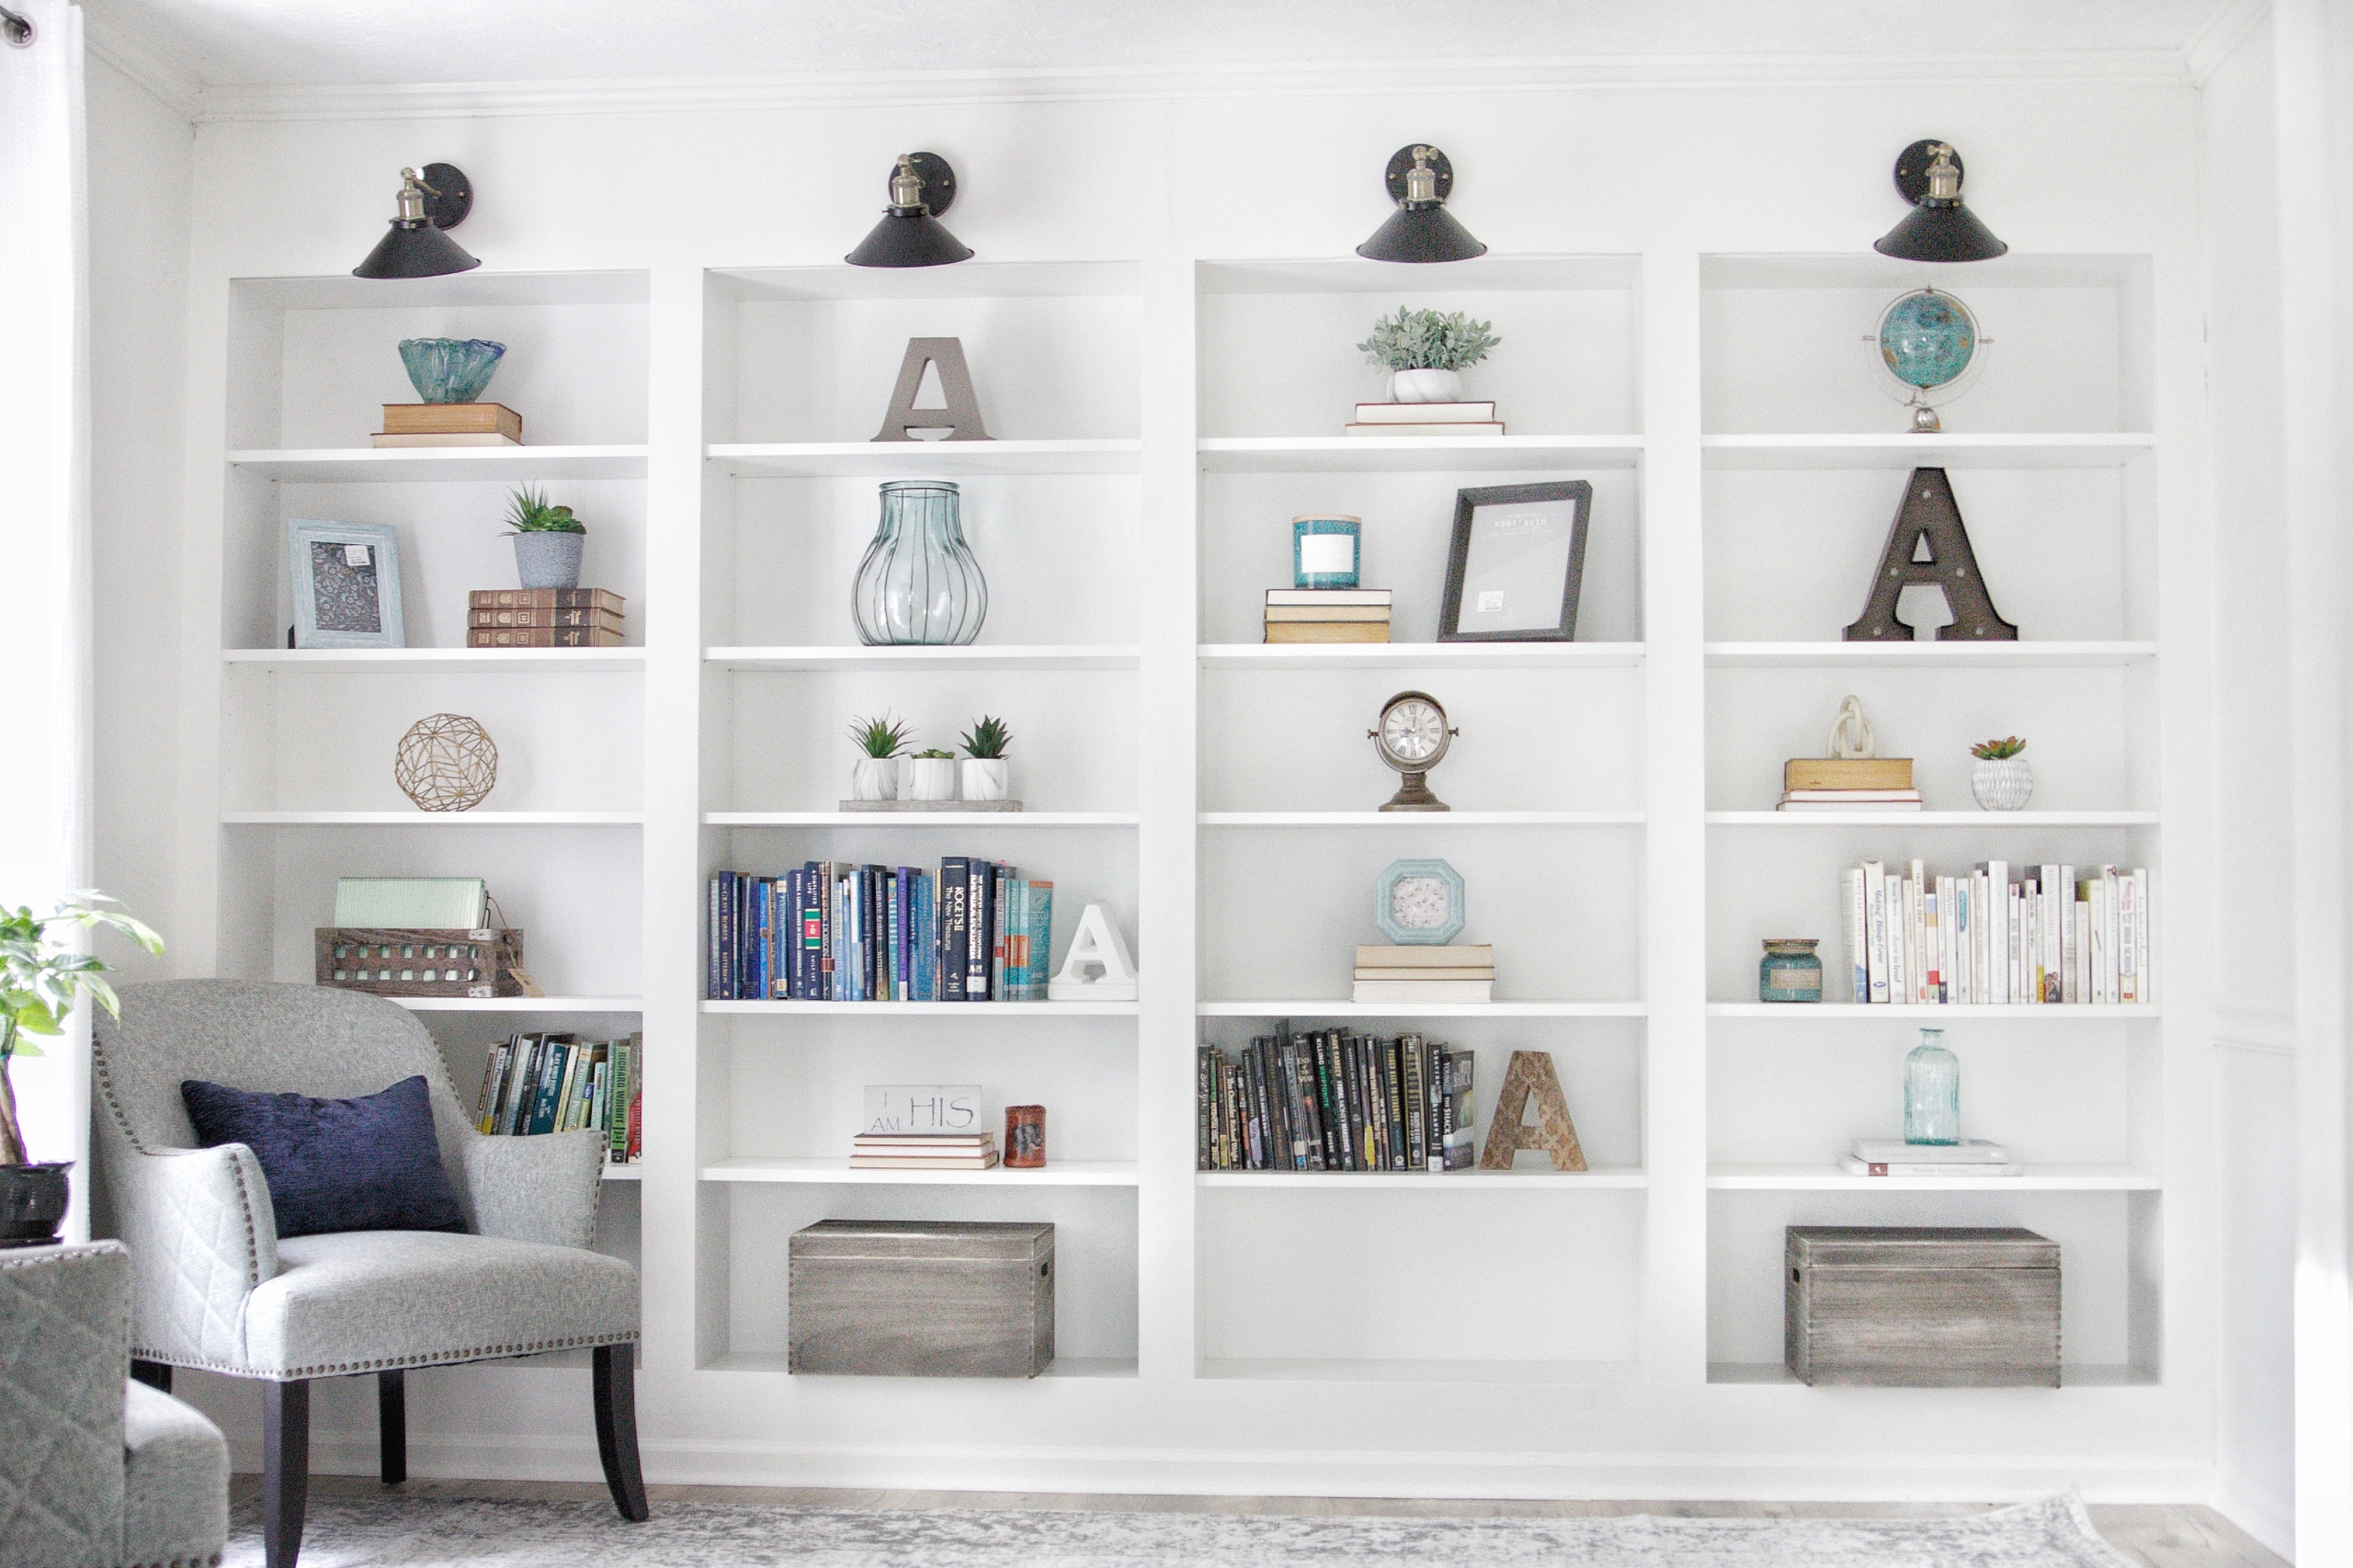 Diy Built Ins Using Ikea Billy, Where Are Billy Bookcases Made